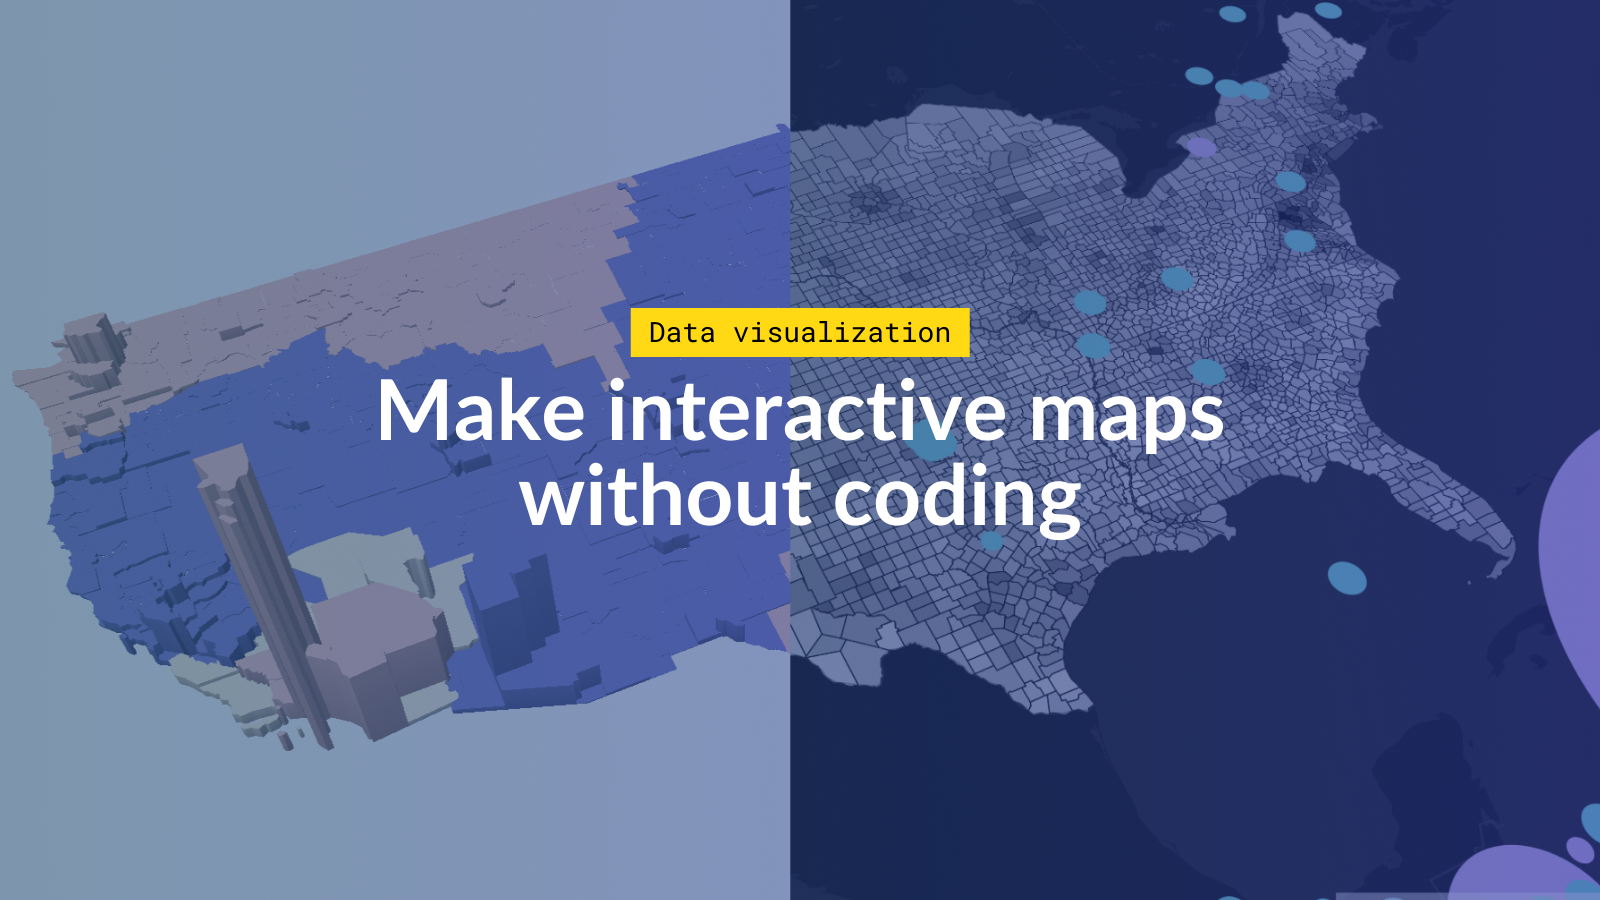 Why is an interactive map good?